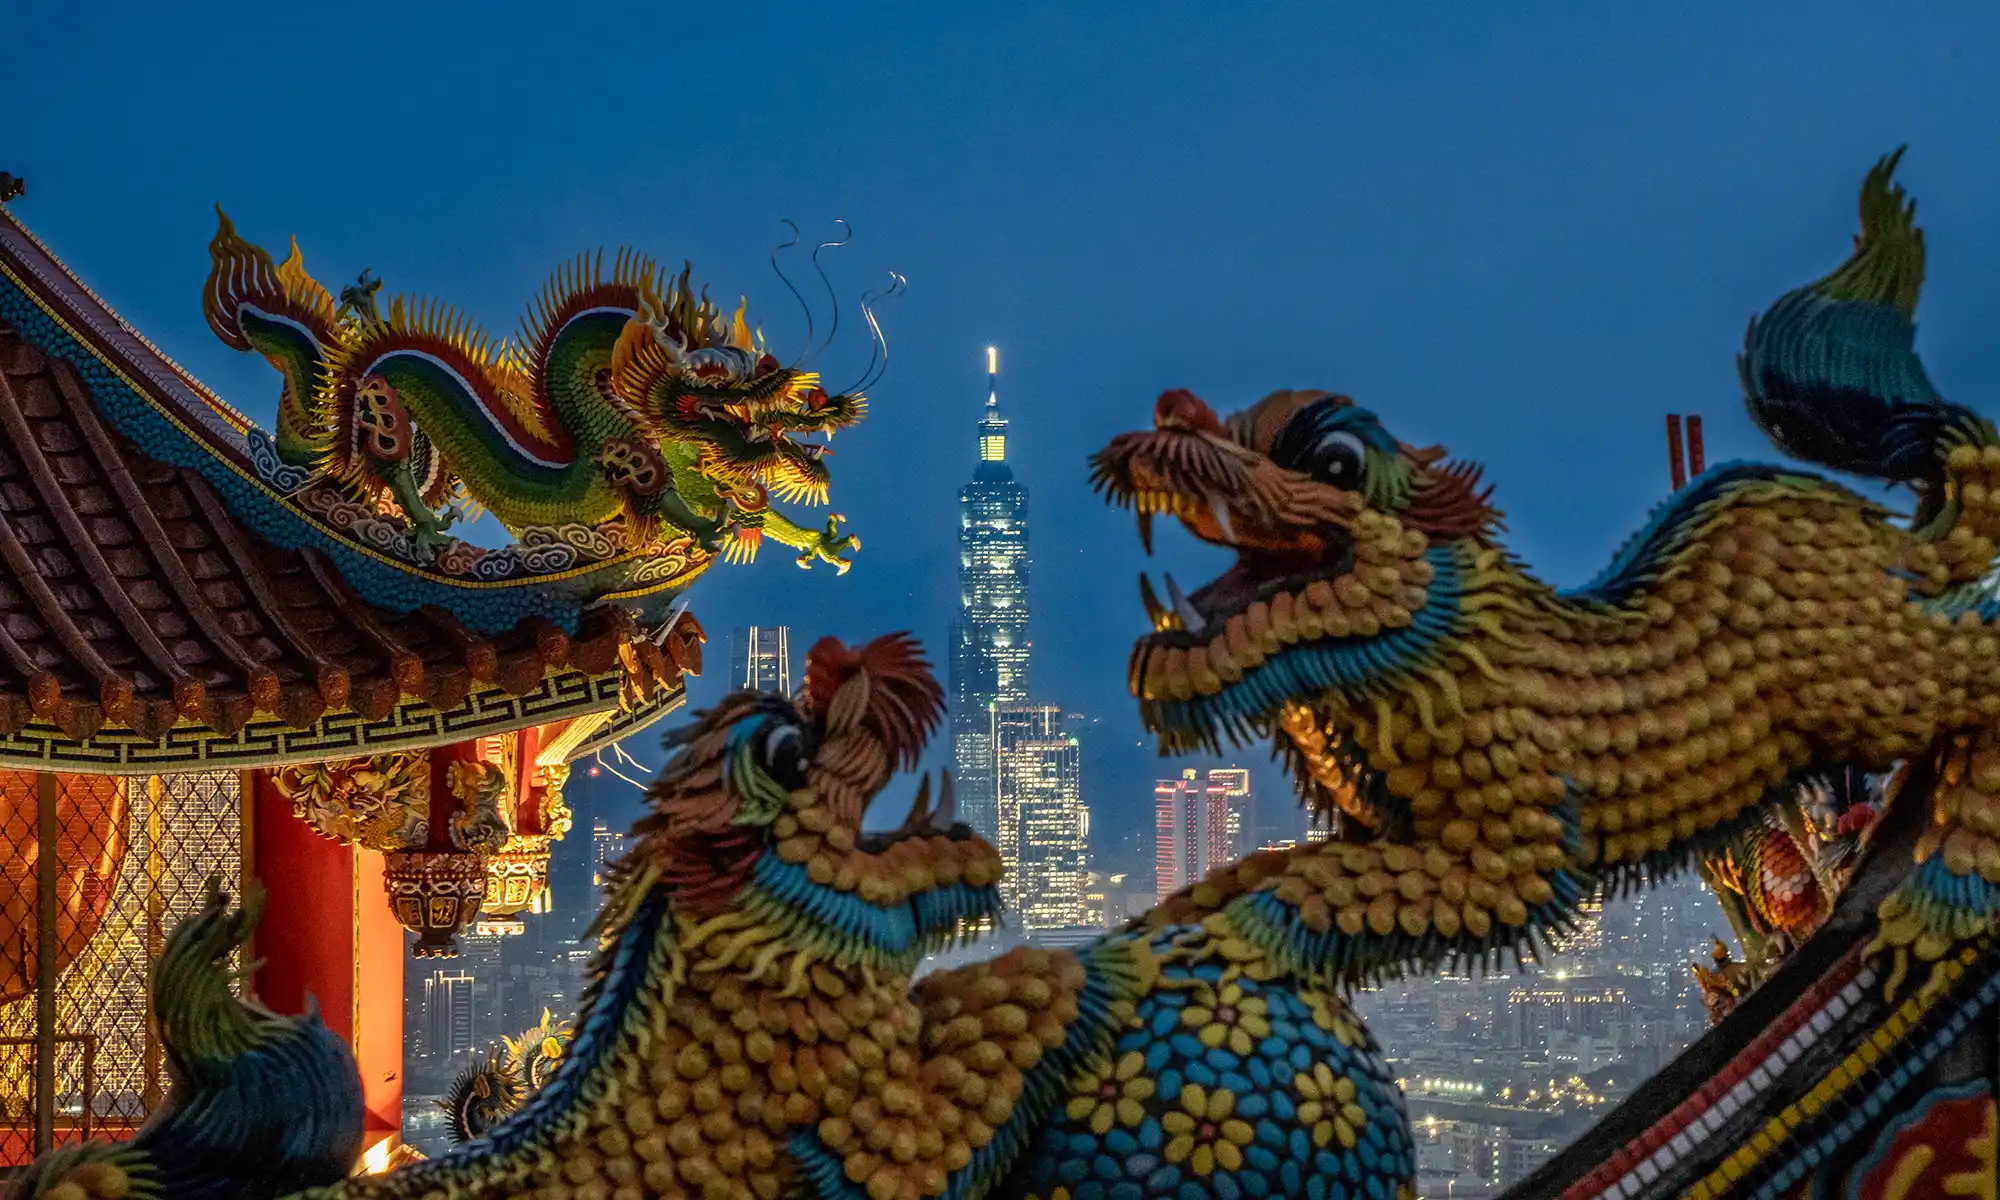 Taipei 101 can be far seen in the distance in the gap between several dragon statues on the temple's roof.